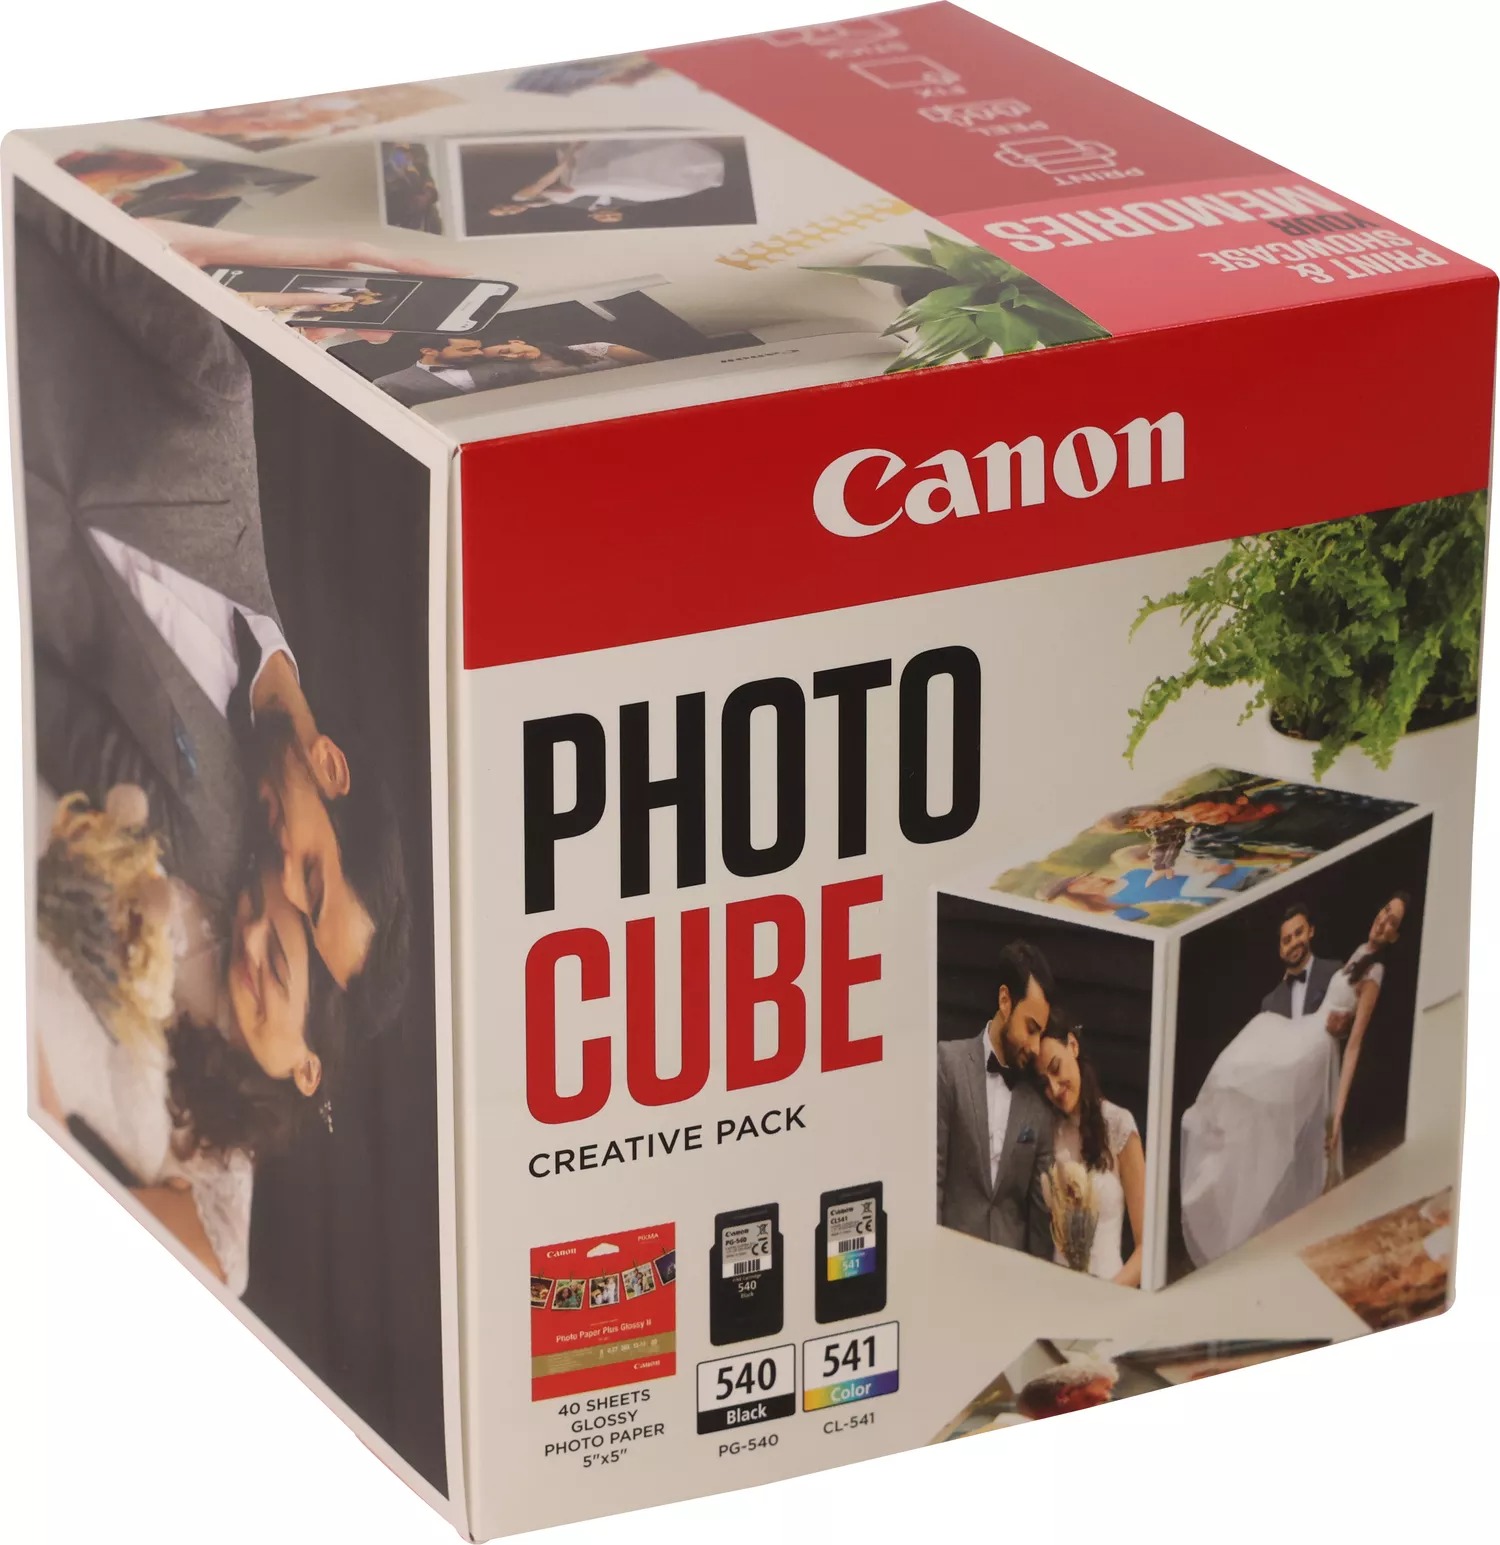 Original Canon PG-540 / CL-541 Photo Cube Ink Cartridges & Glossy Photo Paper Pack Pink (5225B016)